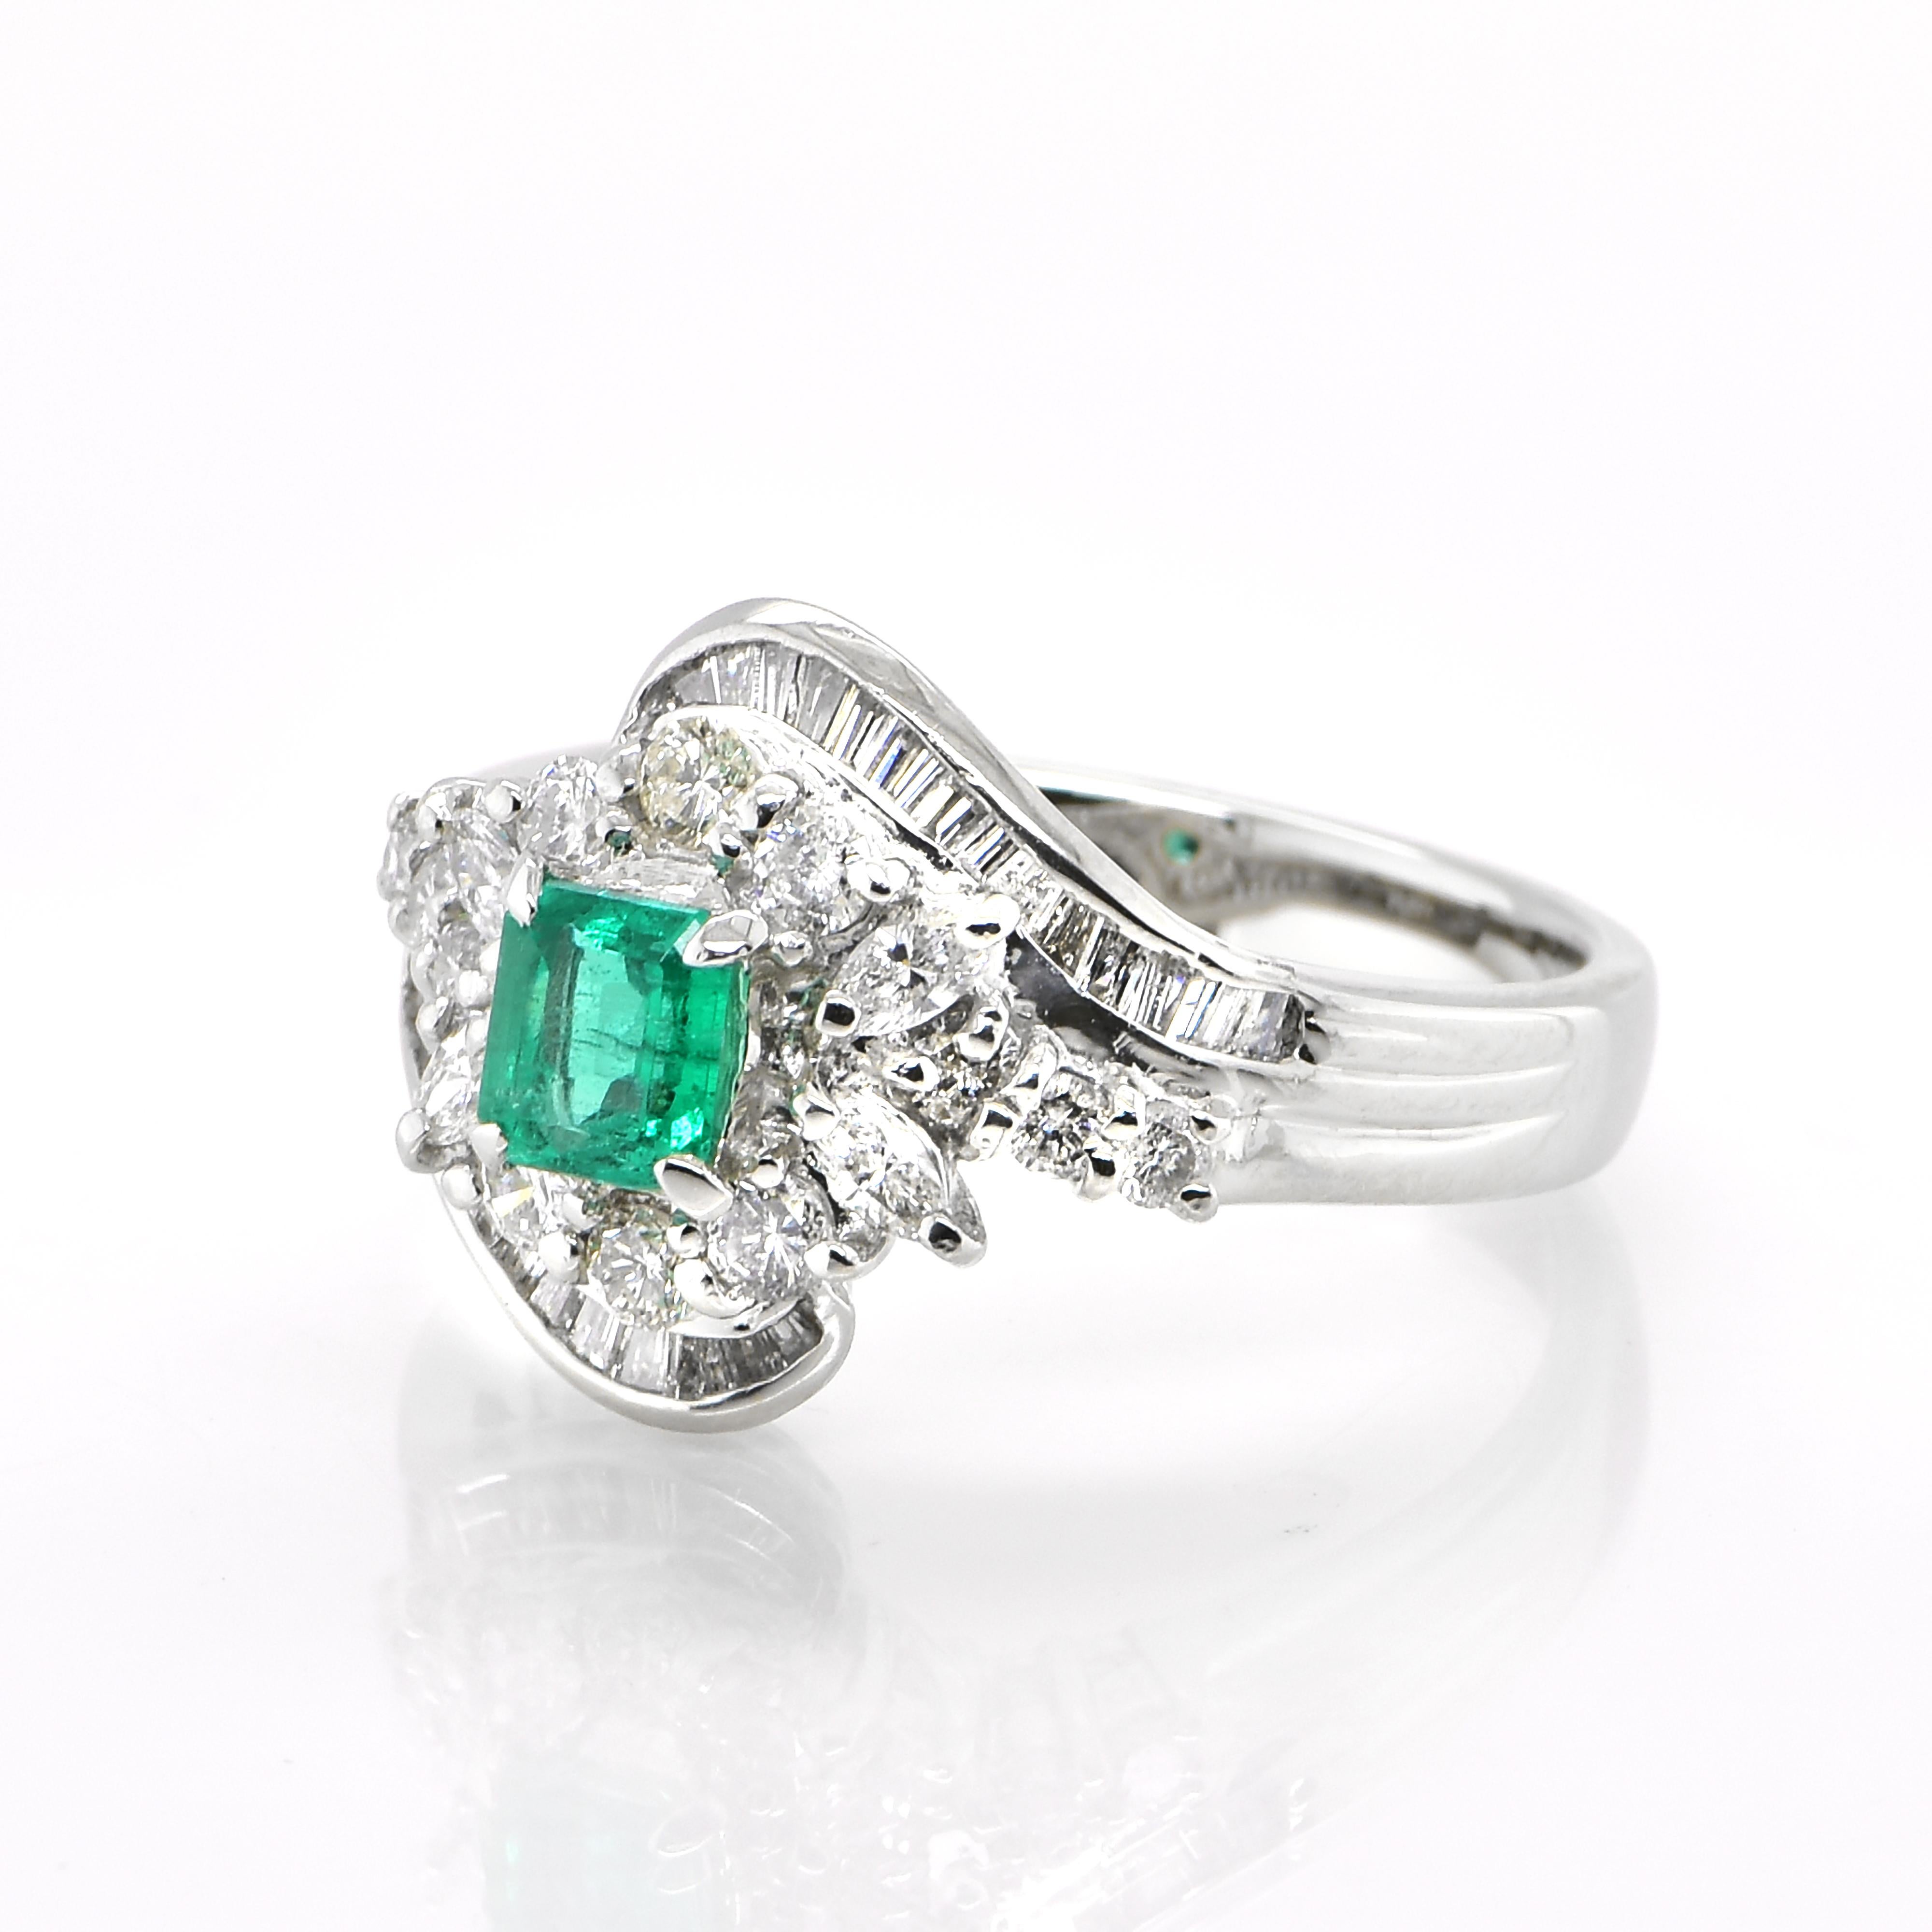 Modern 0.42 Carat Natural Vivid Green Emerald & Diamond Cocktail Ring Made in Platinum For Sale